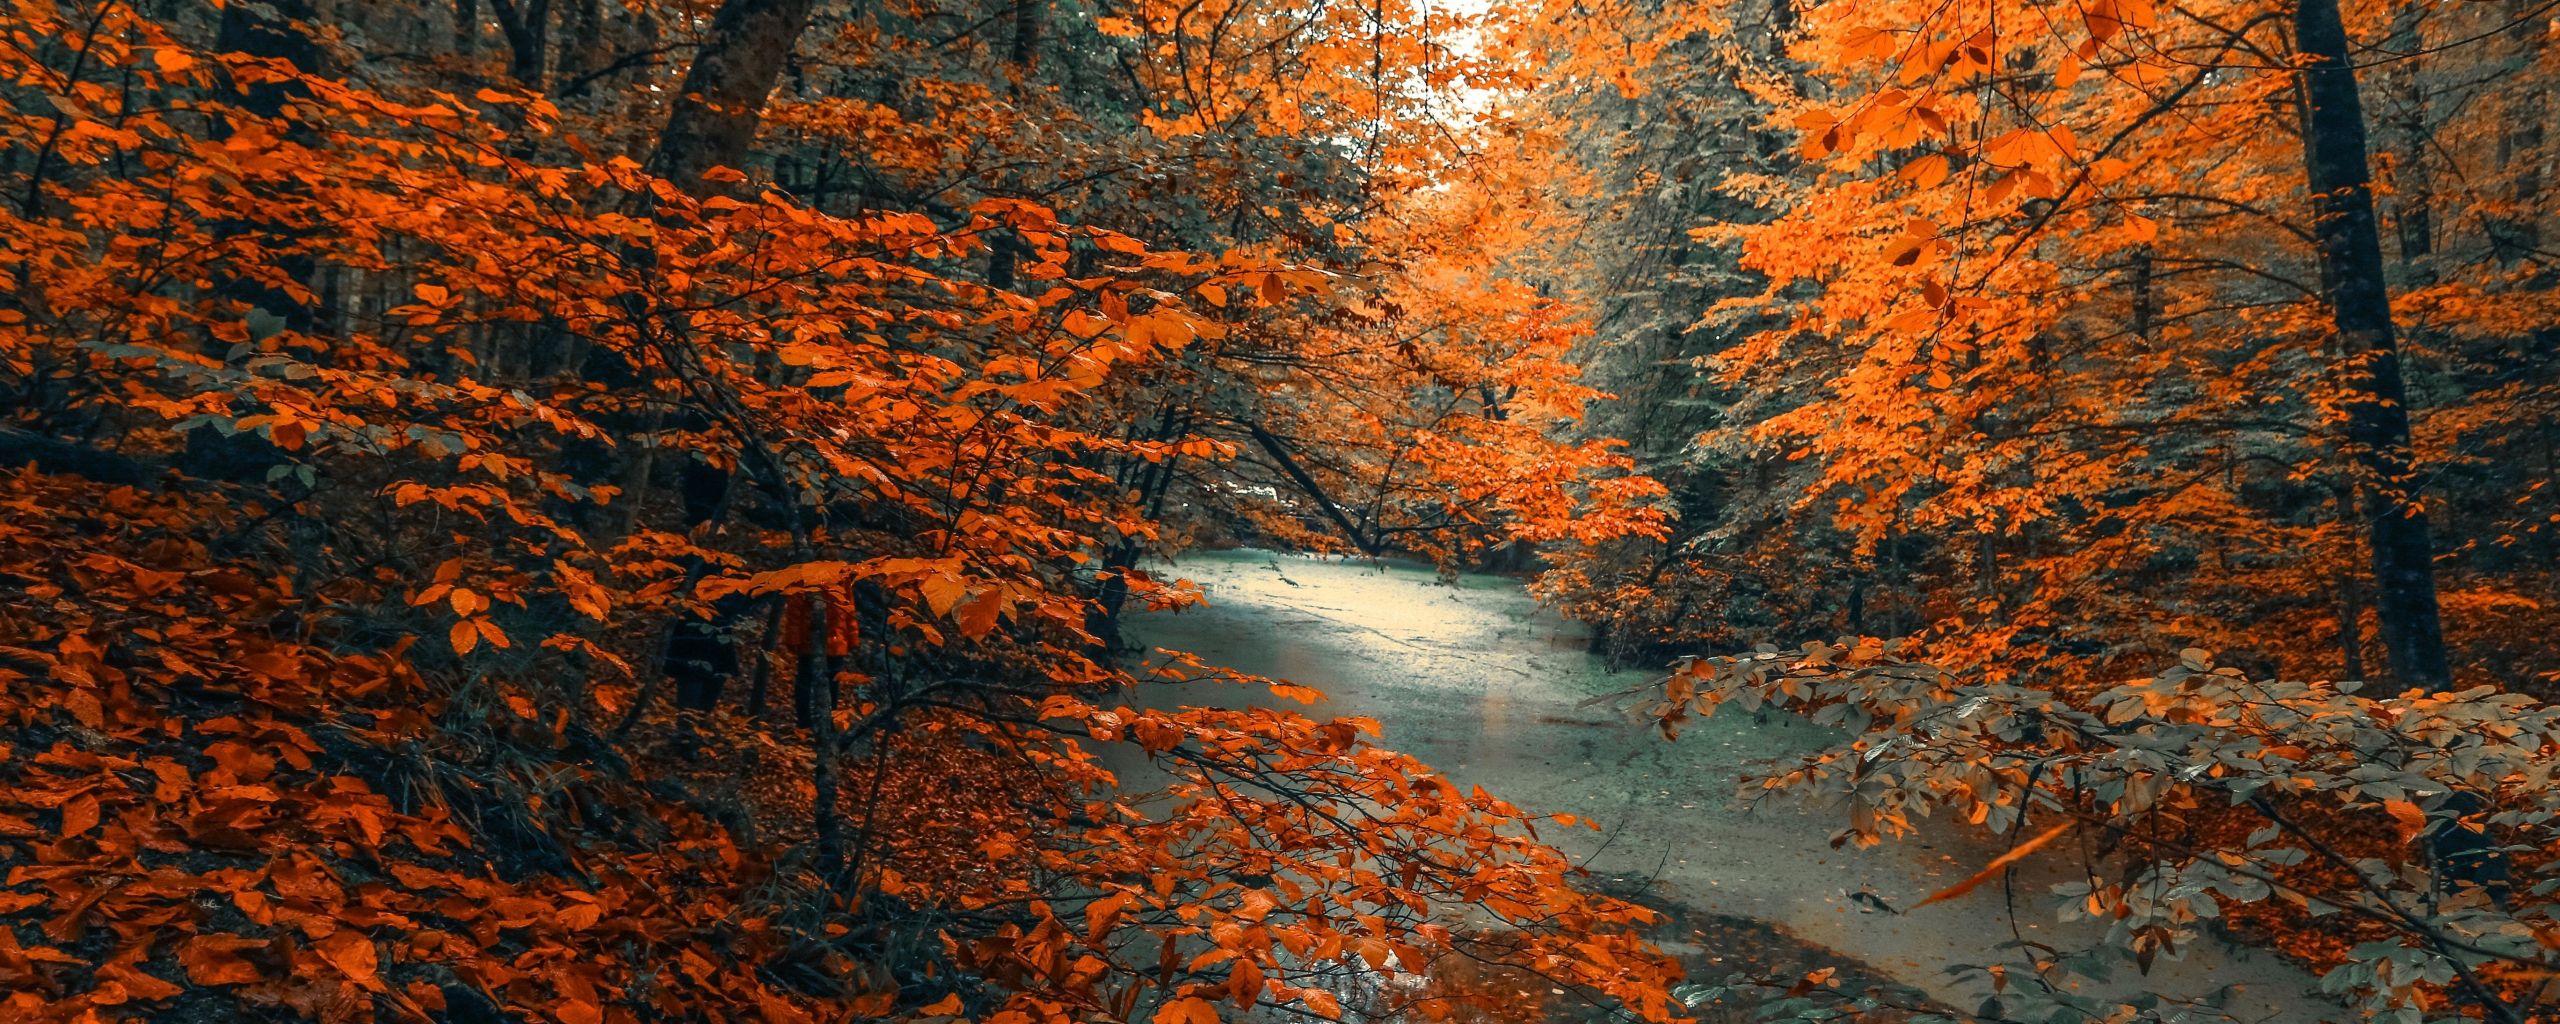 Download 2560x1024 wallpaper tree, forest, nature, orange branches, tree, autumn, dual wide, wide 21: widescreen, 2560x1024 HD image, background, 21127